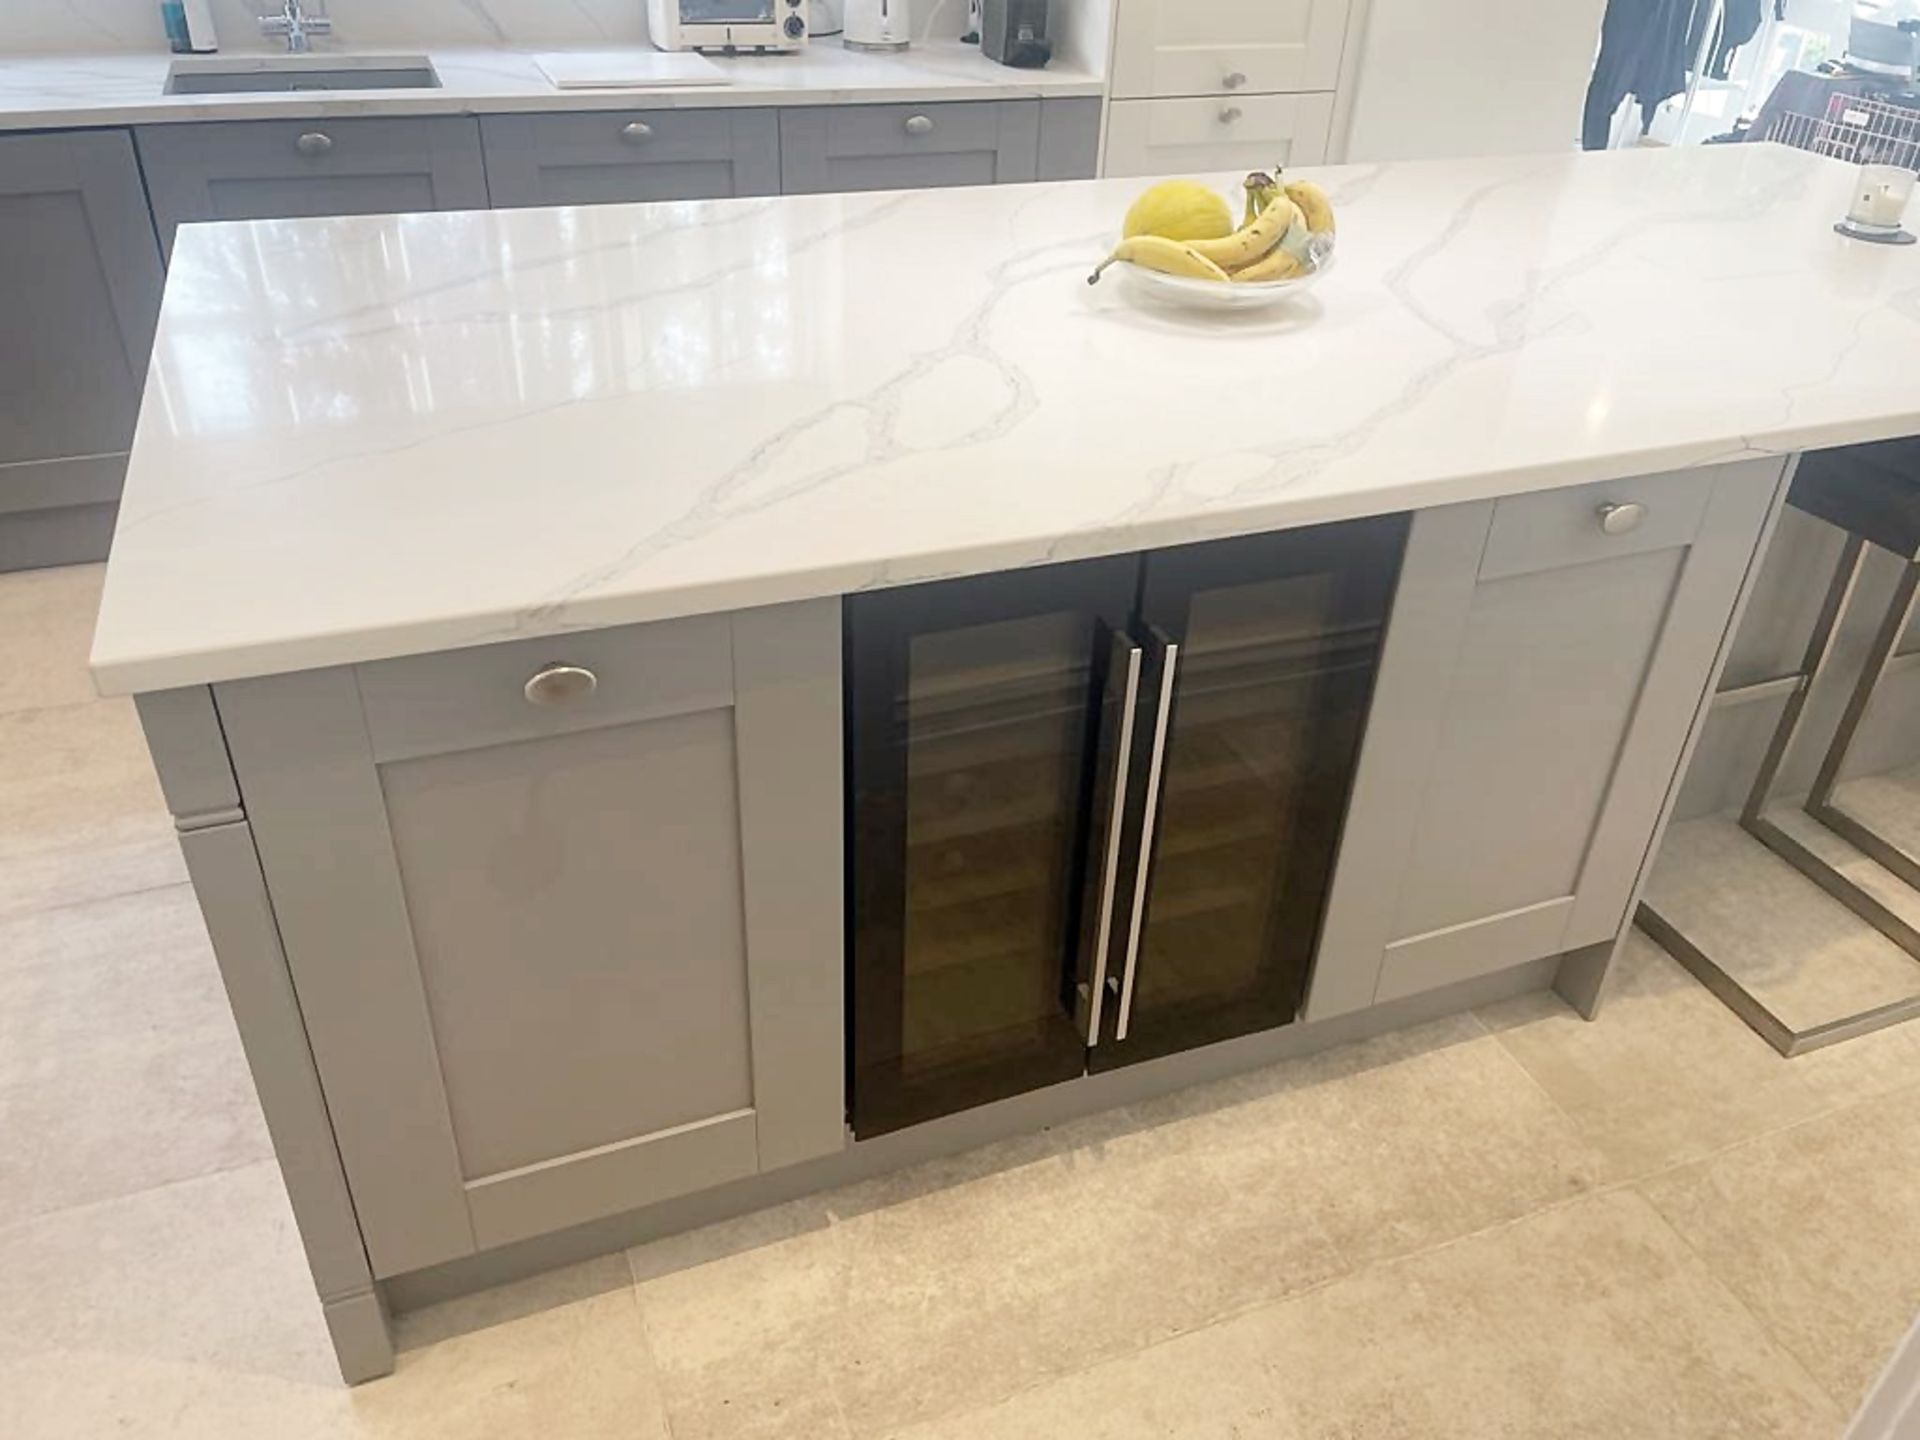 1 x SIEMATIC Bespoke Shaker-style Fitted Kitchen, Utility Room, Appliances & Modern Quartz Surfaces - Image 68 of 99